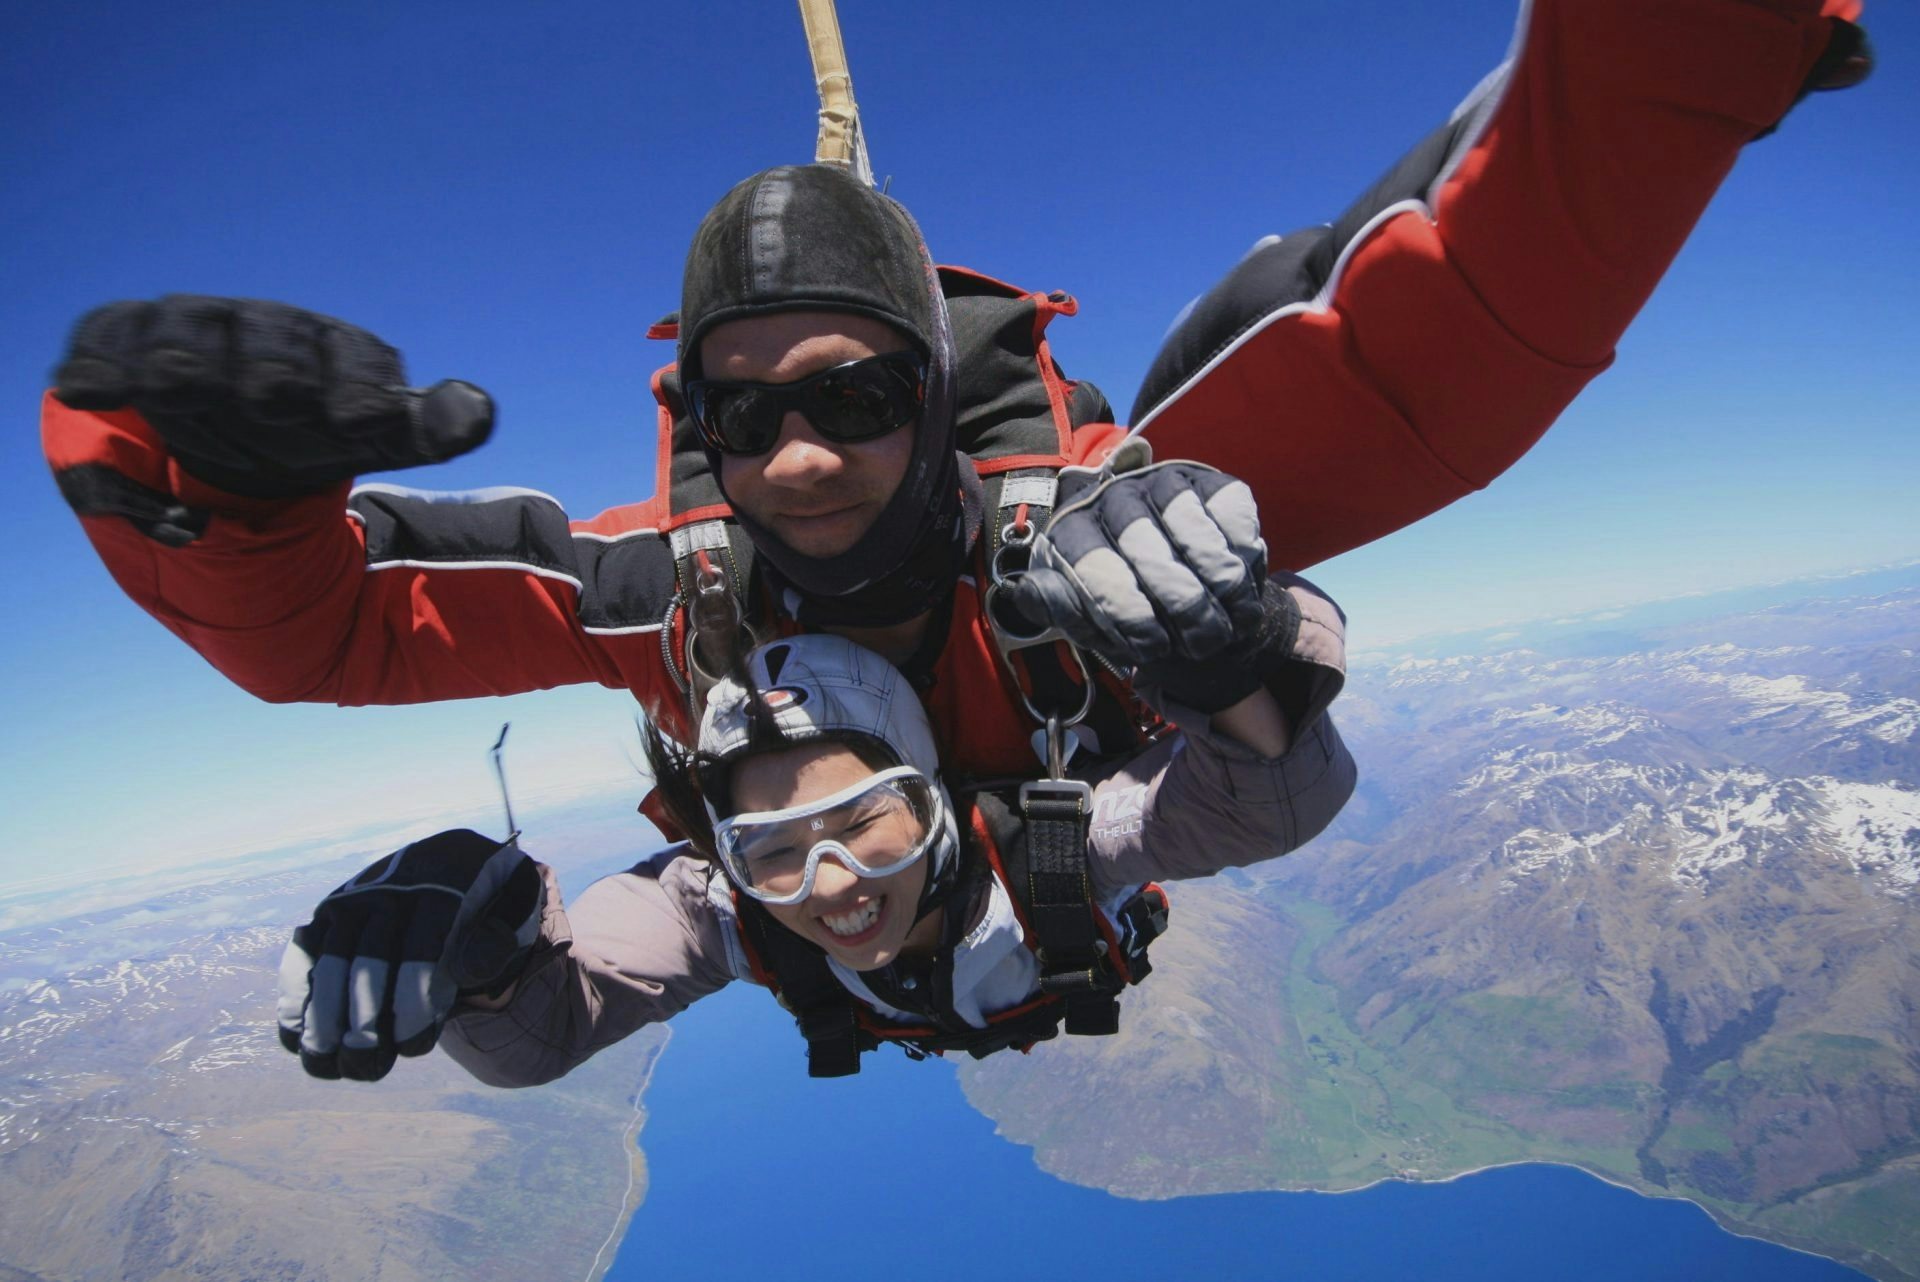 Chinese demand for adventure travel is causing a shortage of skydiving instructors in New Zealand. (April Ngern/Flickr)